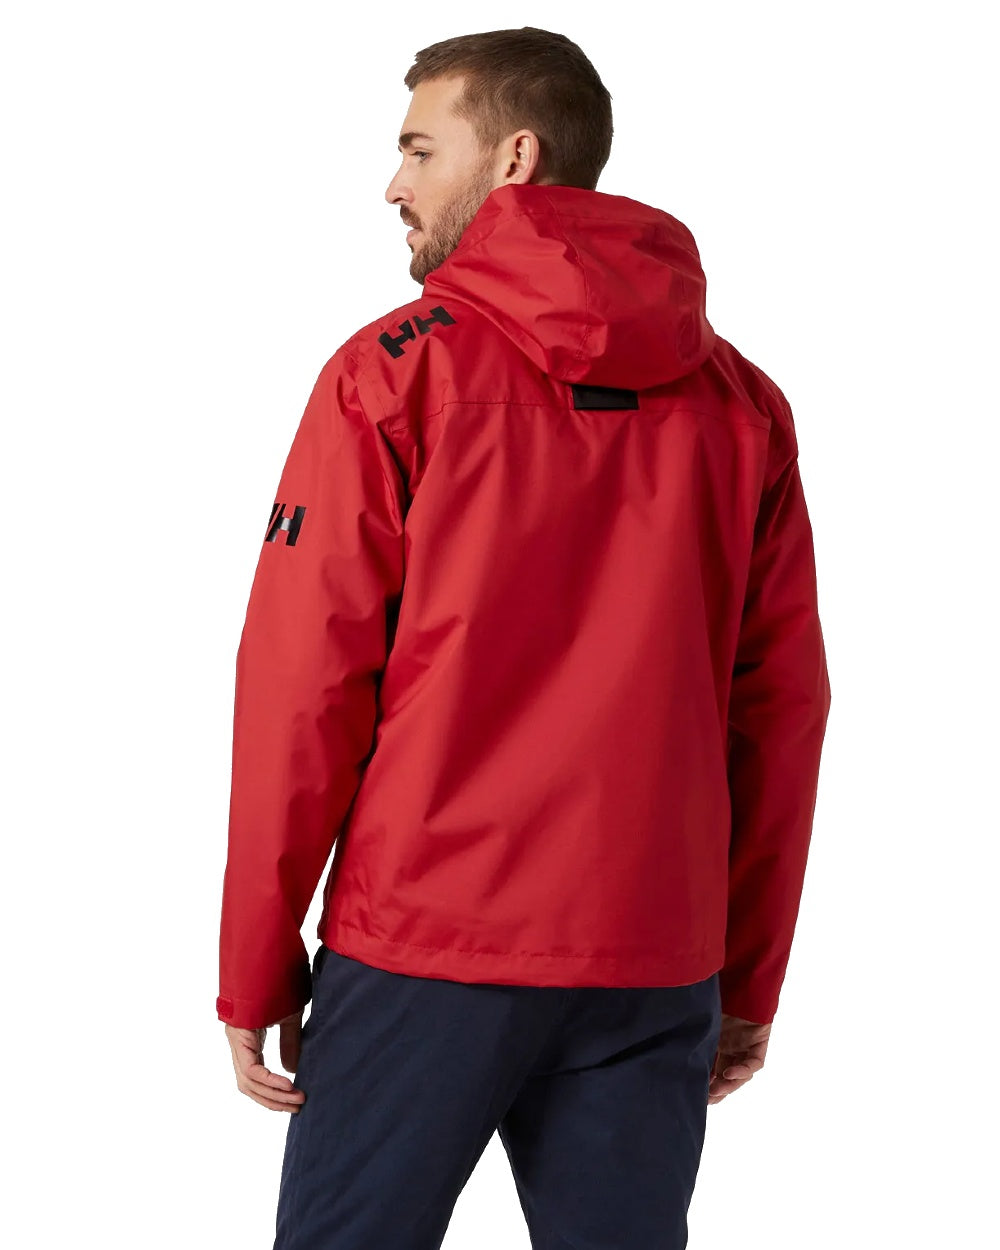 Helly Hansen Mens Crew Hooded Midlayer Sailing Jacket in Red 